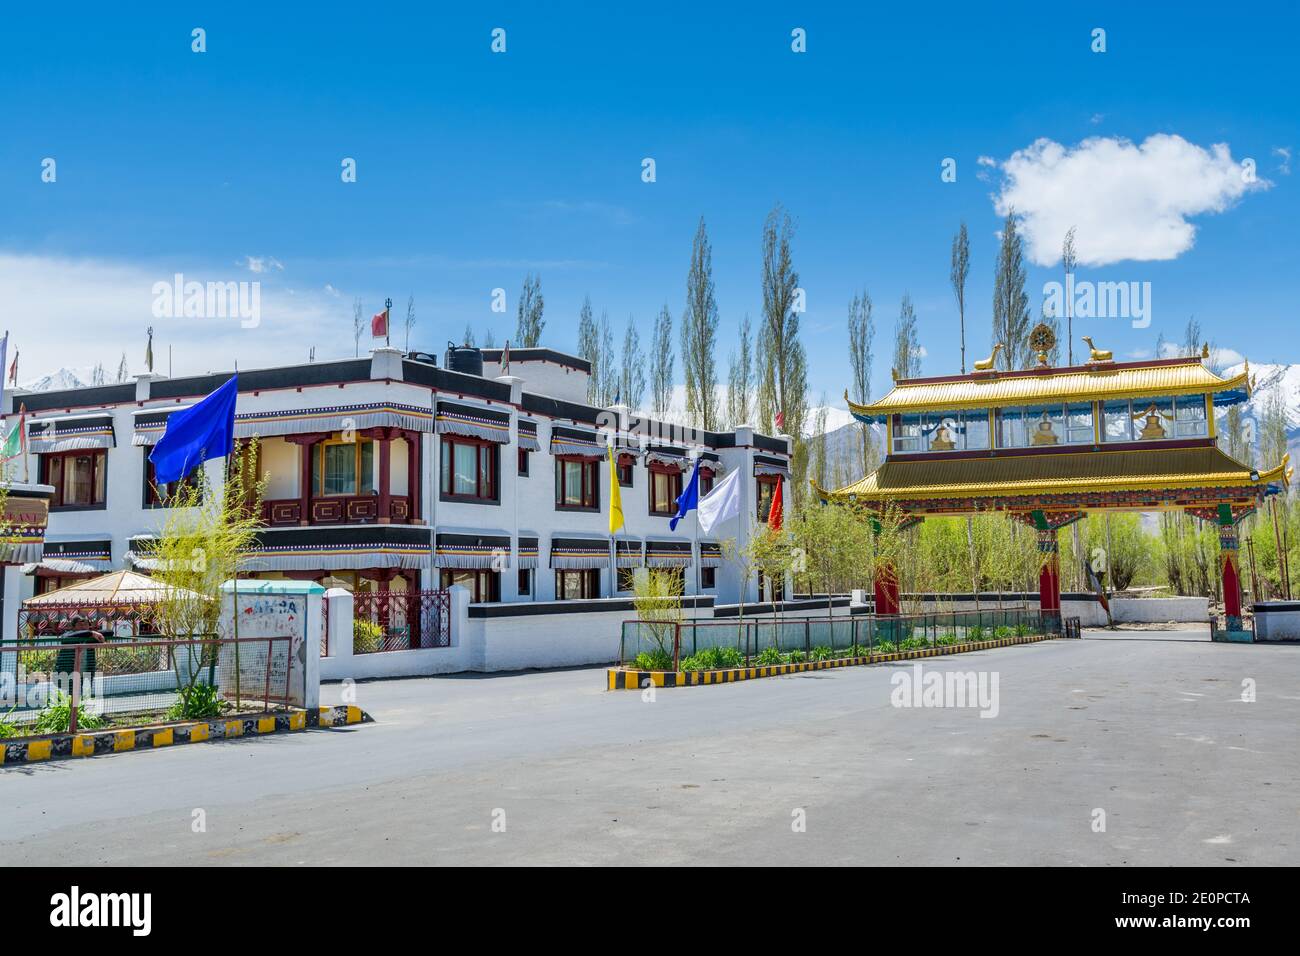 Tibetan buildings of CHAMBA Hotel and Restaurant in front of Thiksey Monastery or Thiksey Gompa, A famous Tibetan temple in Ladakh, India Stock Photo